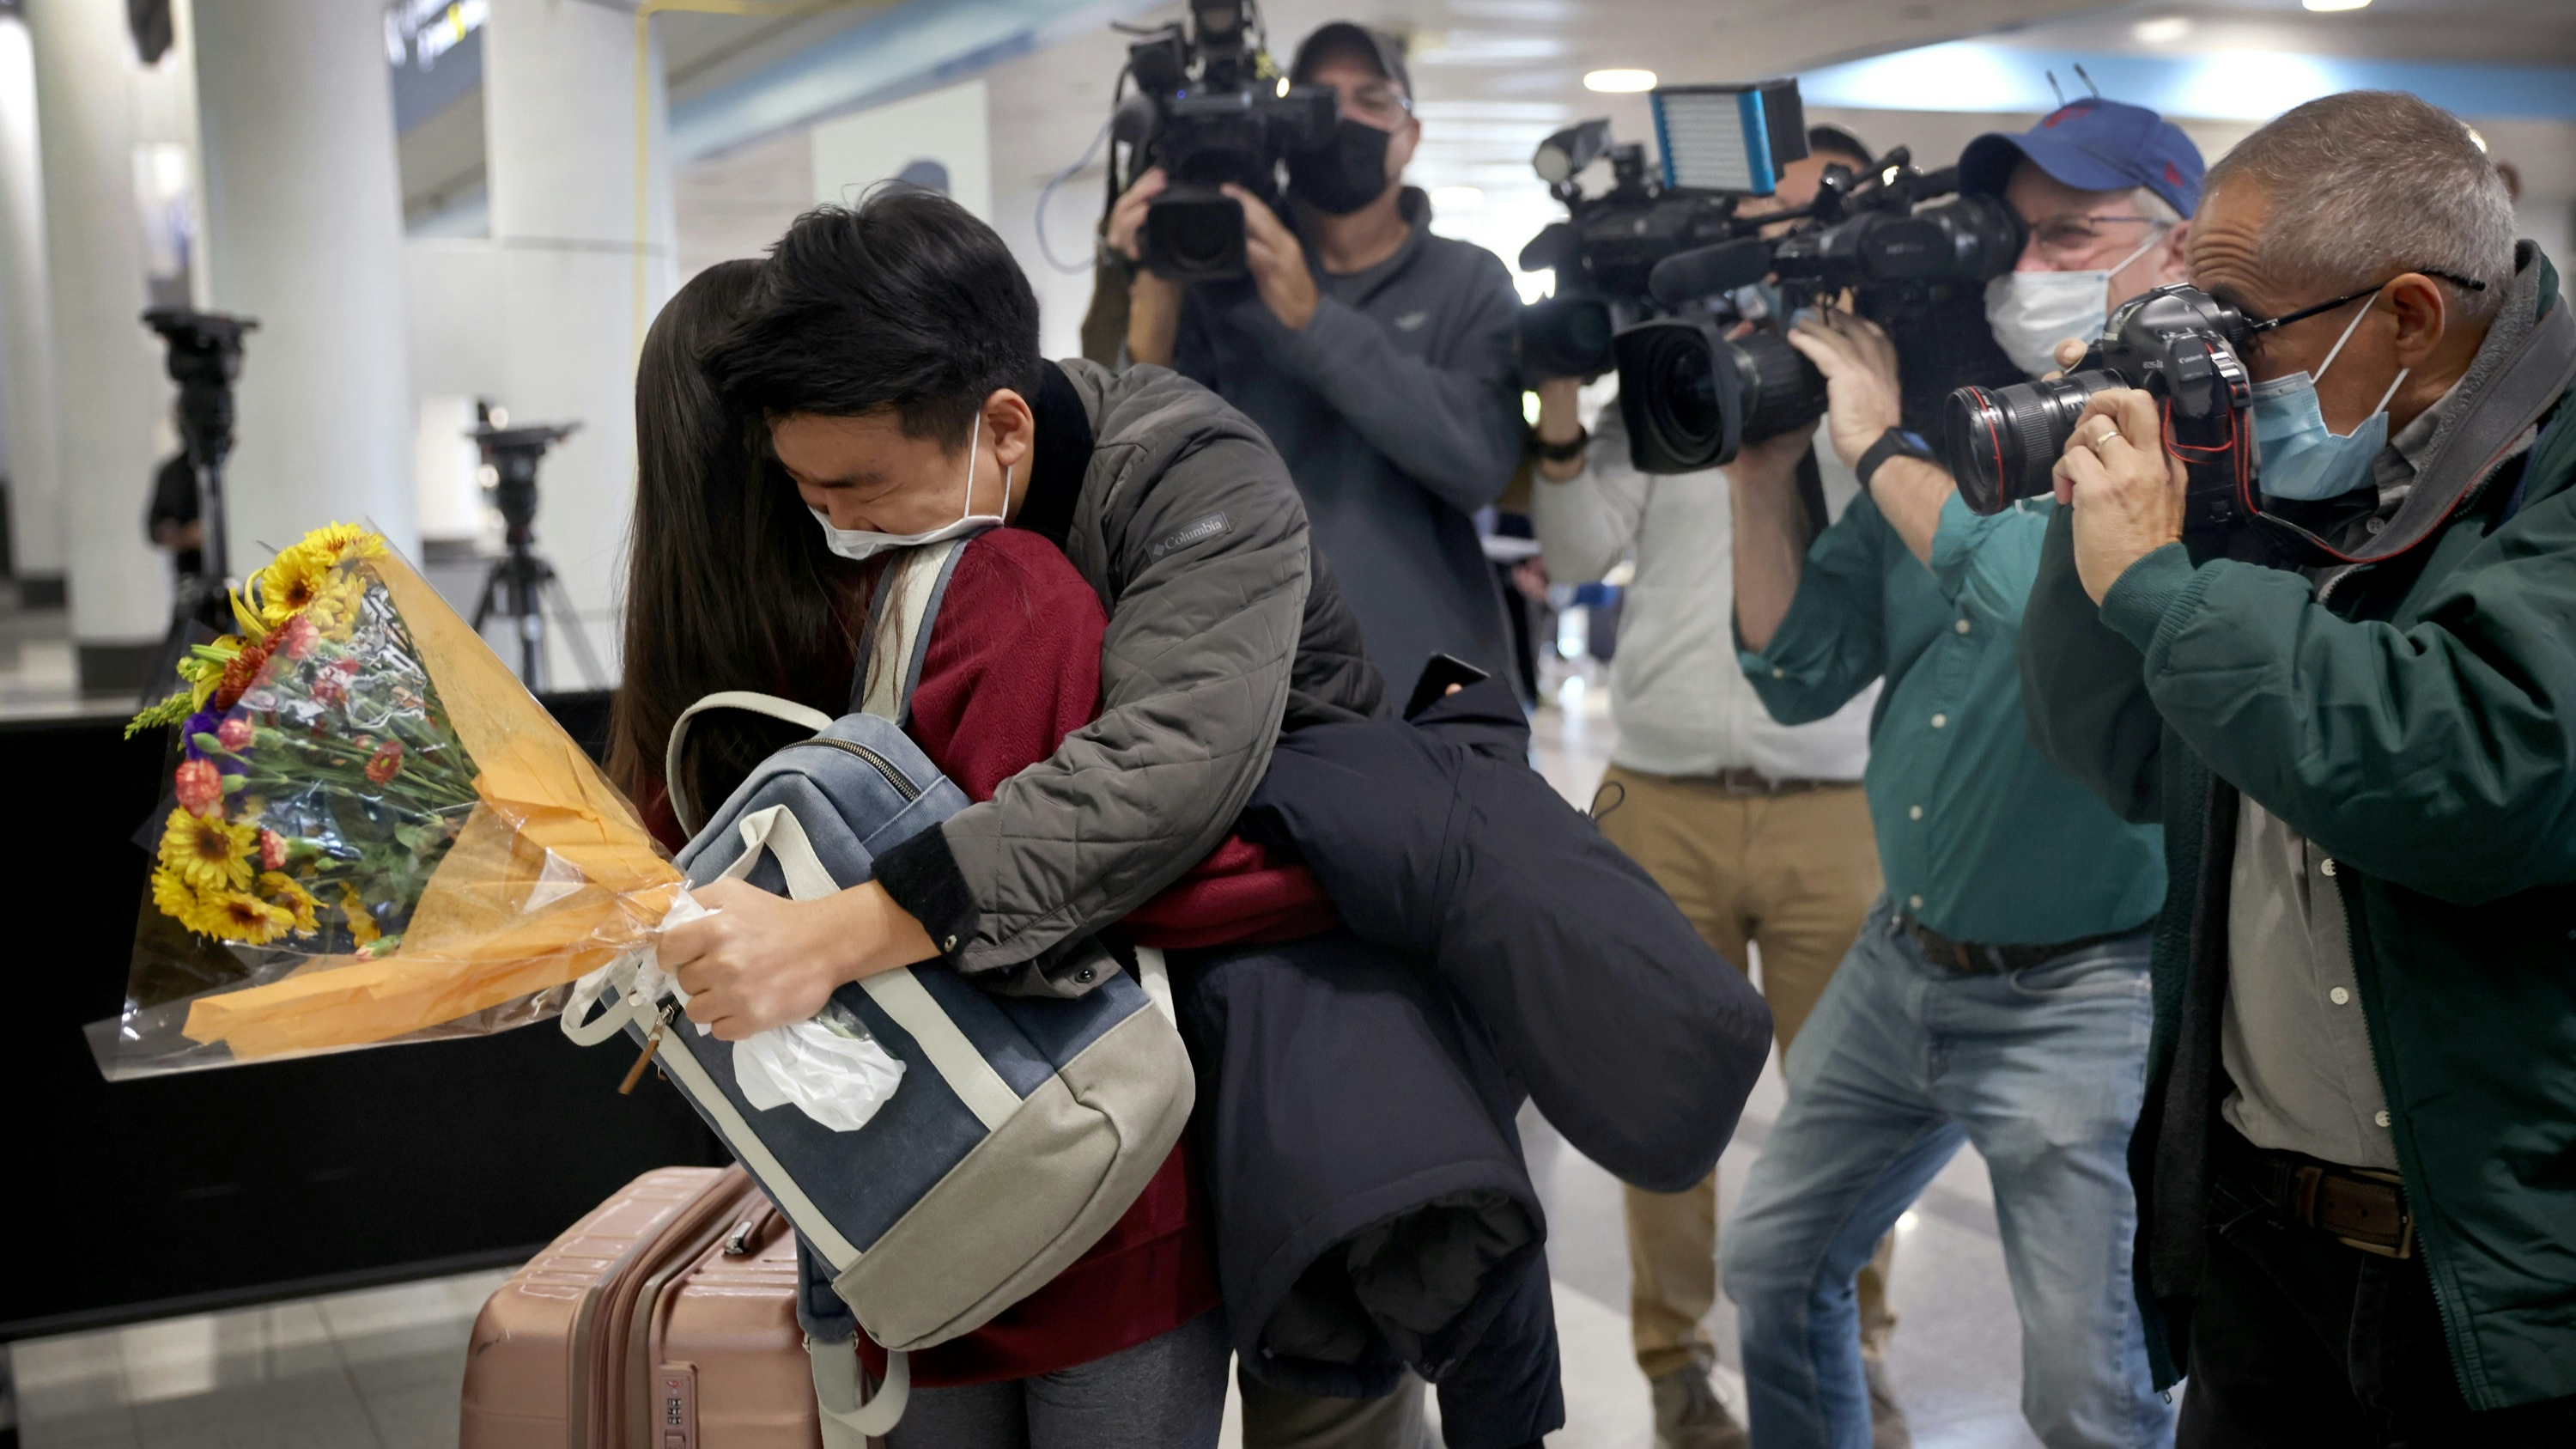 News crews gather around as Yerin Hong gets a hug from her boyfriend Soomin Kim after she arrived on a flight from Germany at the international terminal at O'Hare